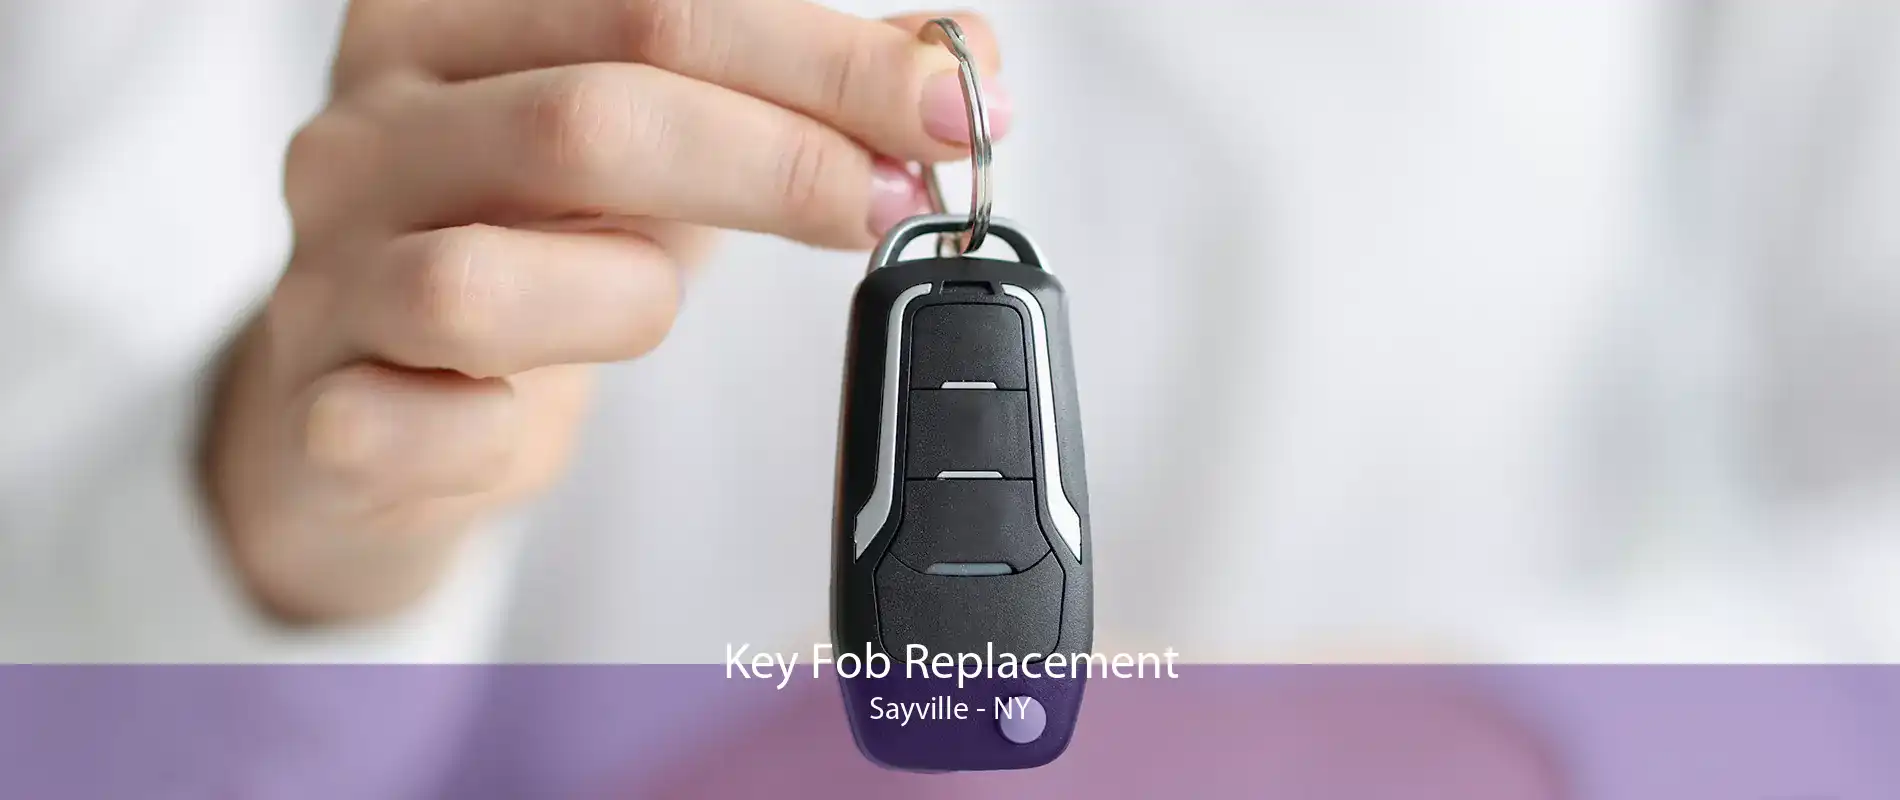 Key Fob Replacement Sayville - NY